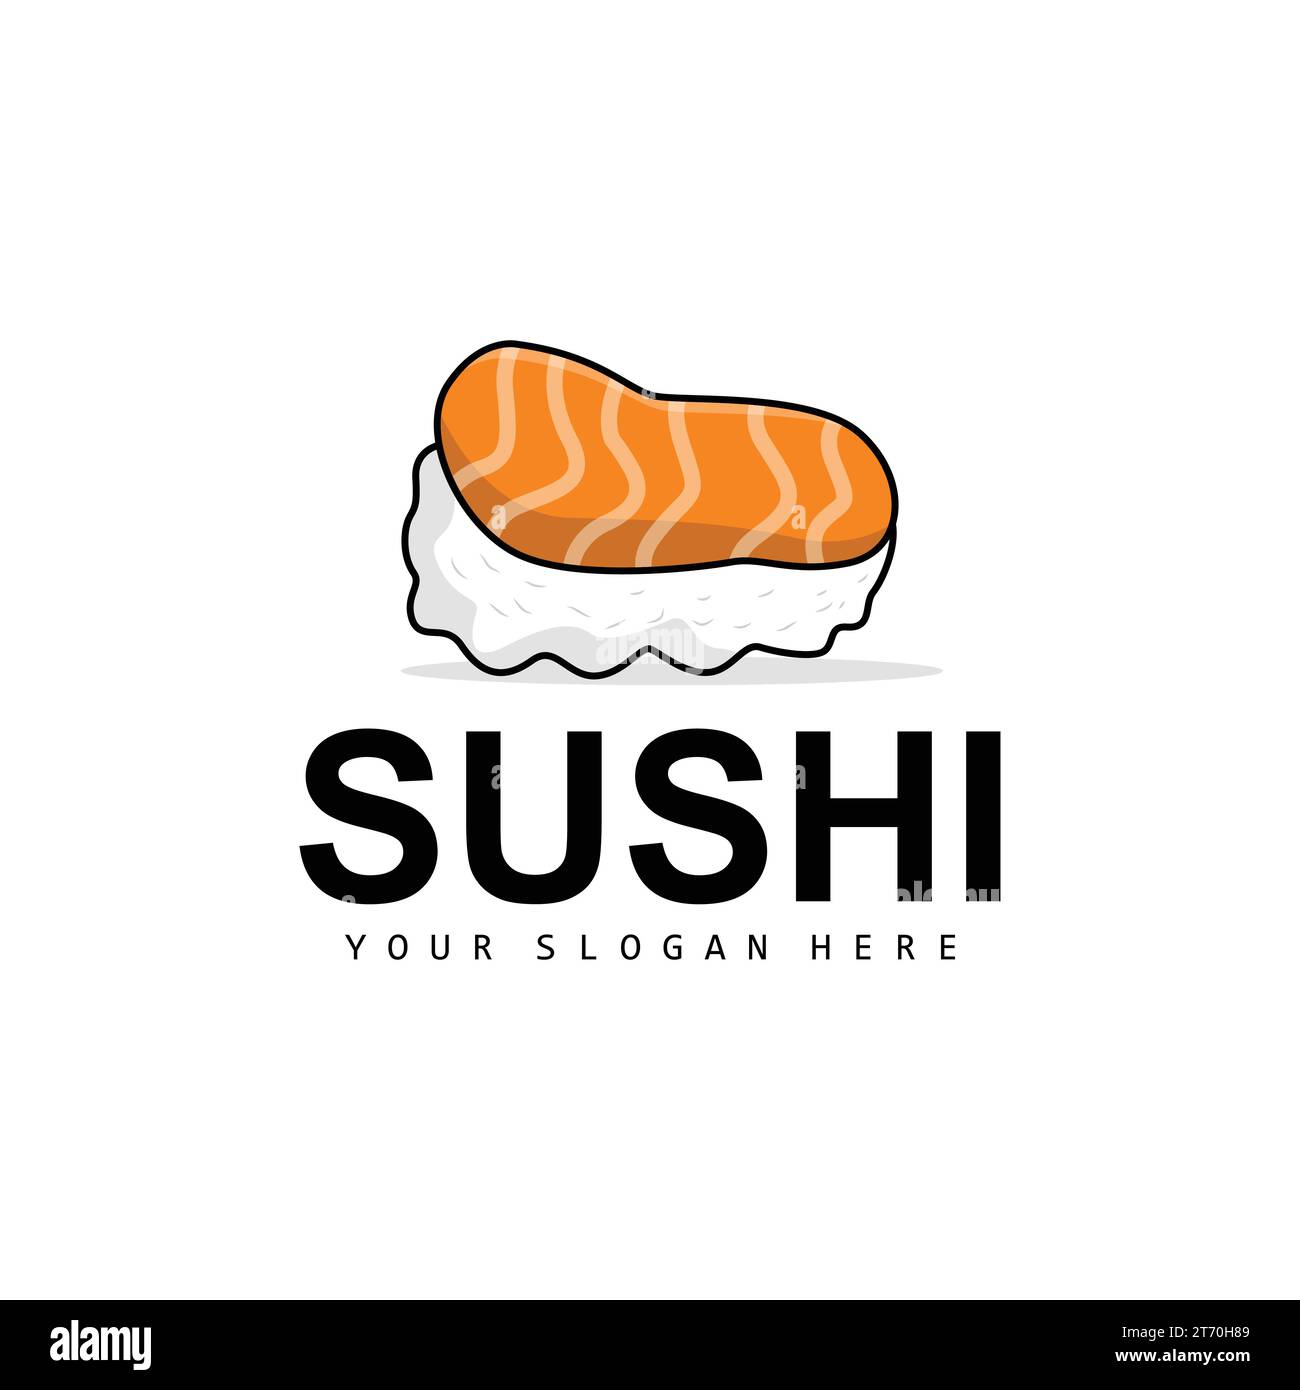 Sushi Logo, Japanese Food Sushi Seafood Vector, Japanese Cuisine Product Brand Design, Template Icon Stock Vector